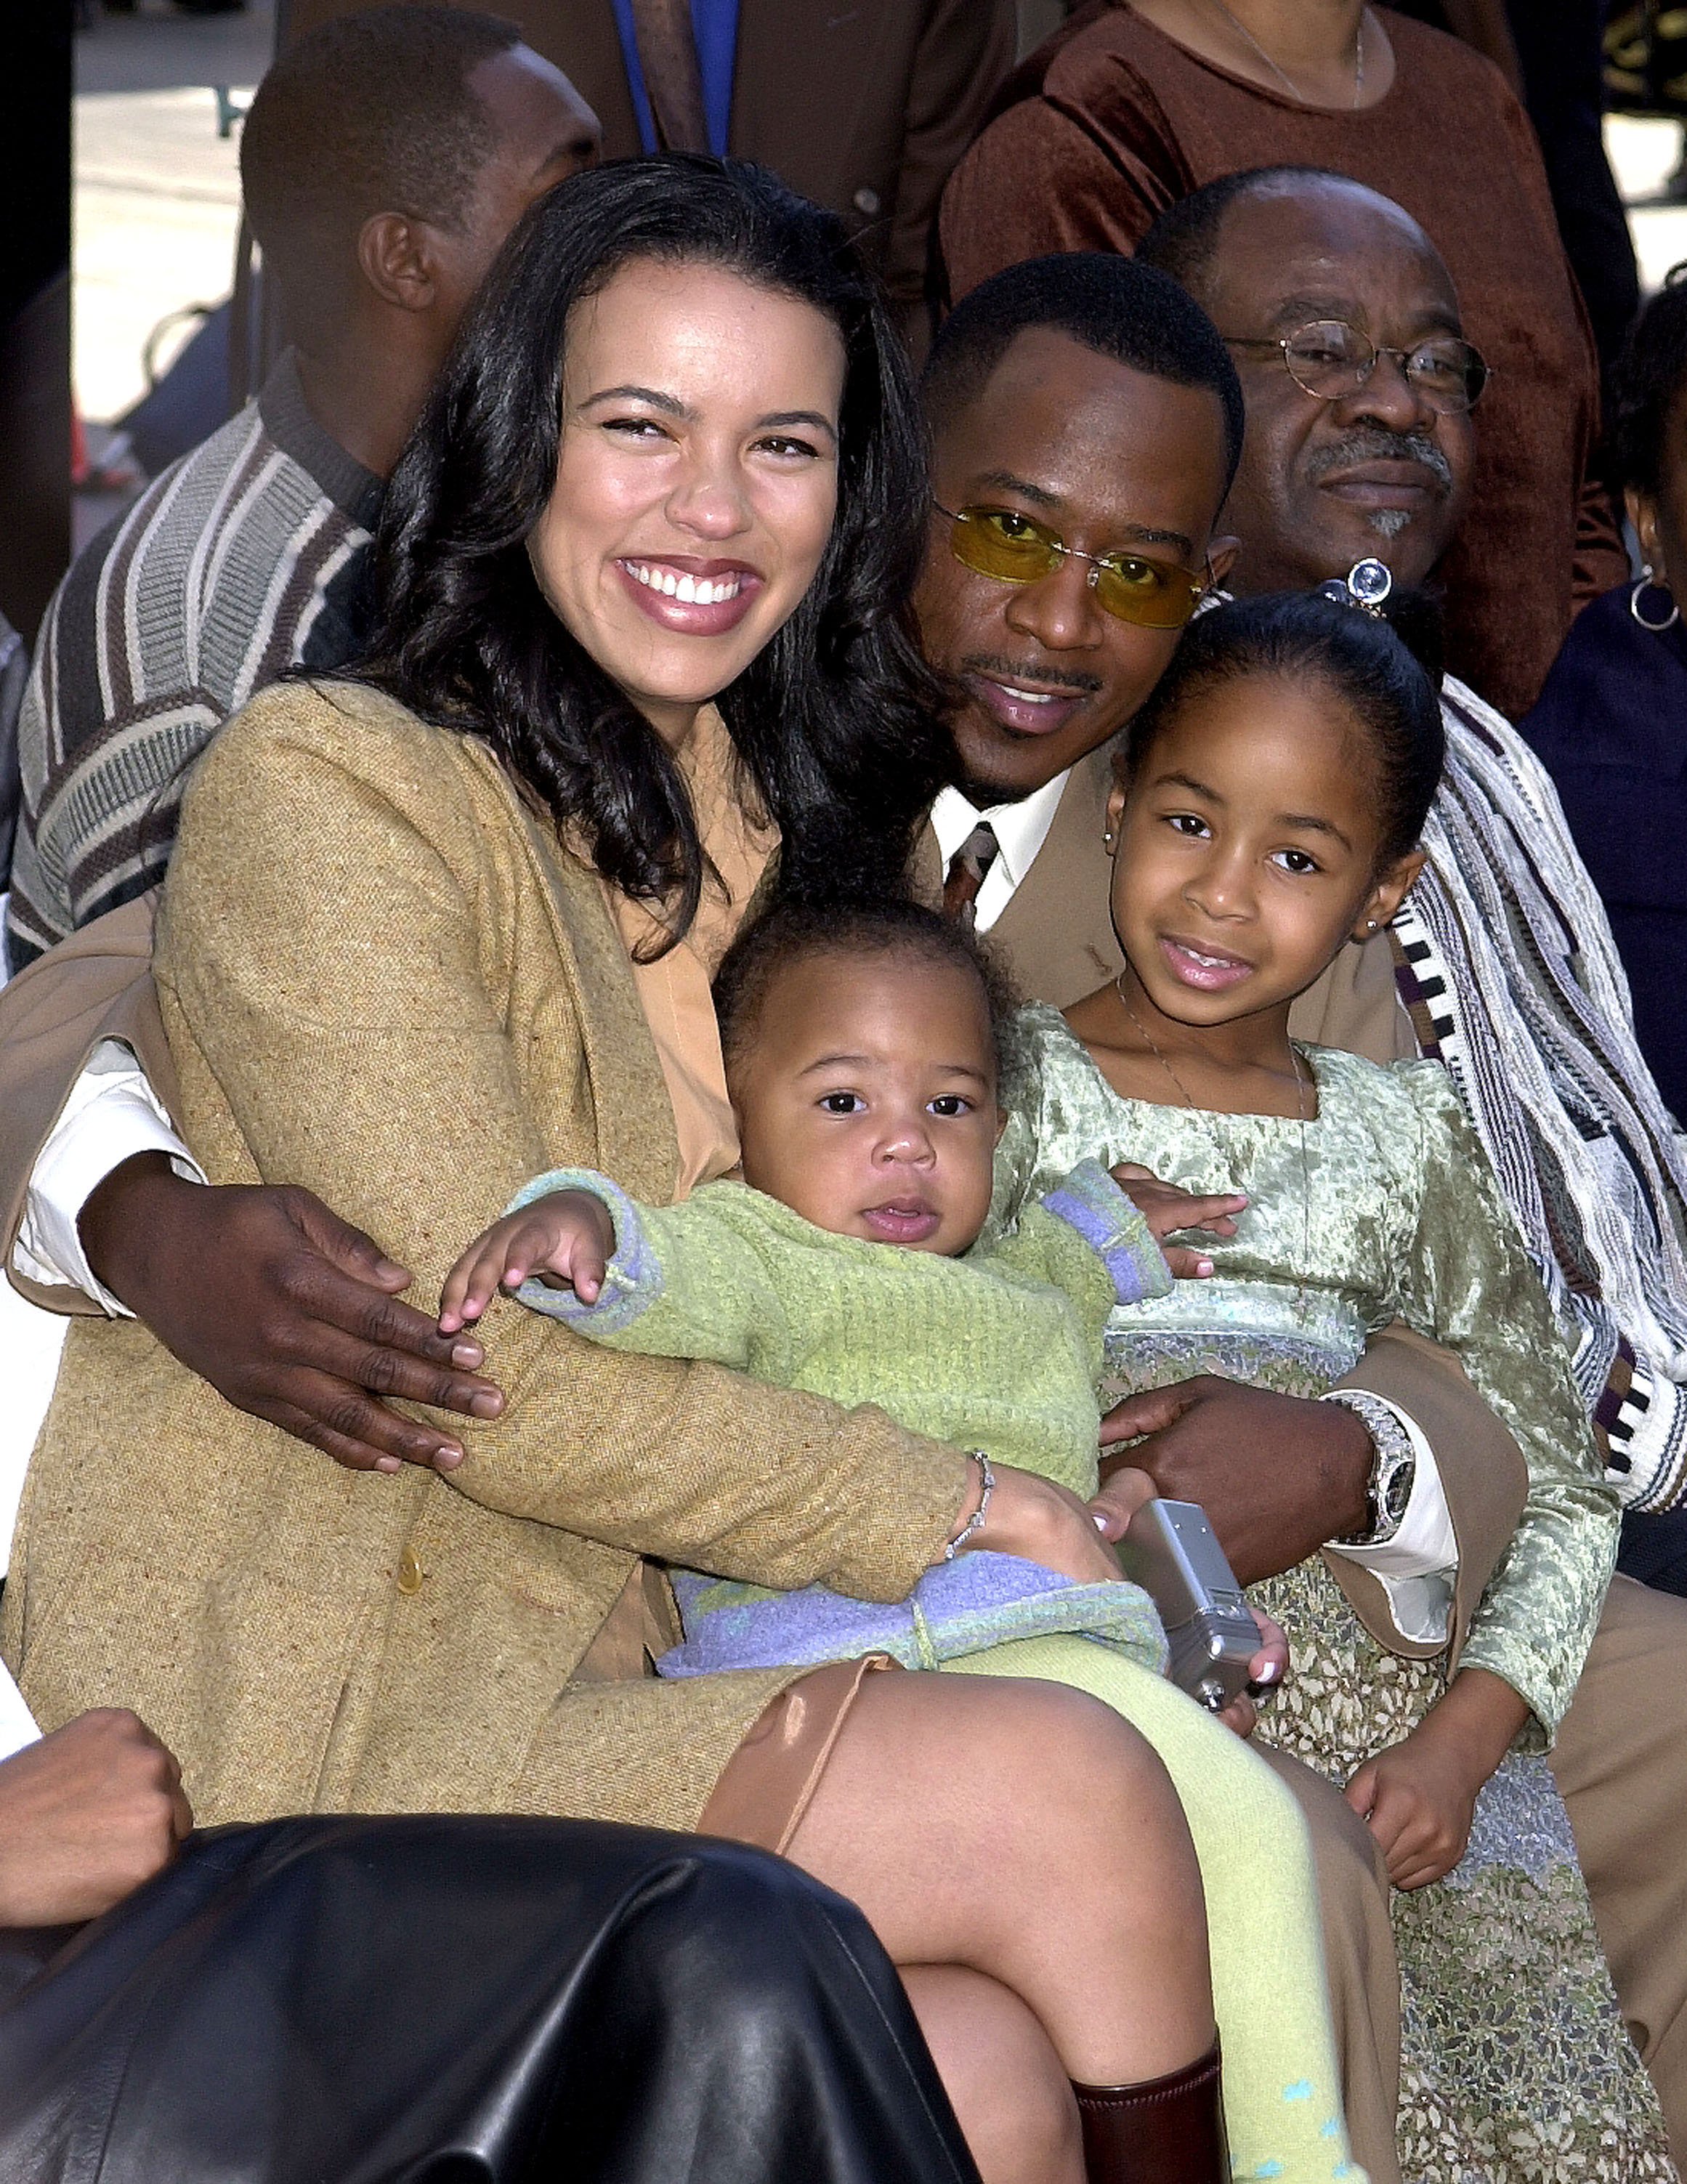 Shamicka, Martin, Iyanna and Jasmin Lawrence at the Mann's Chinese Theatre in Hollywood, California November 19, 2001 | Photo: GettyImages